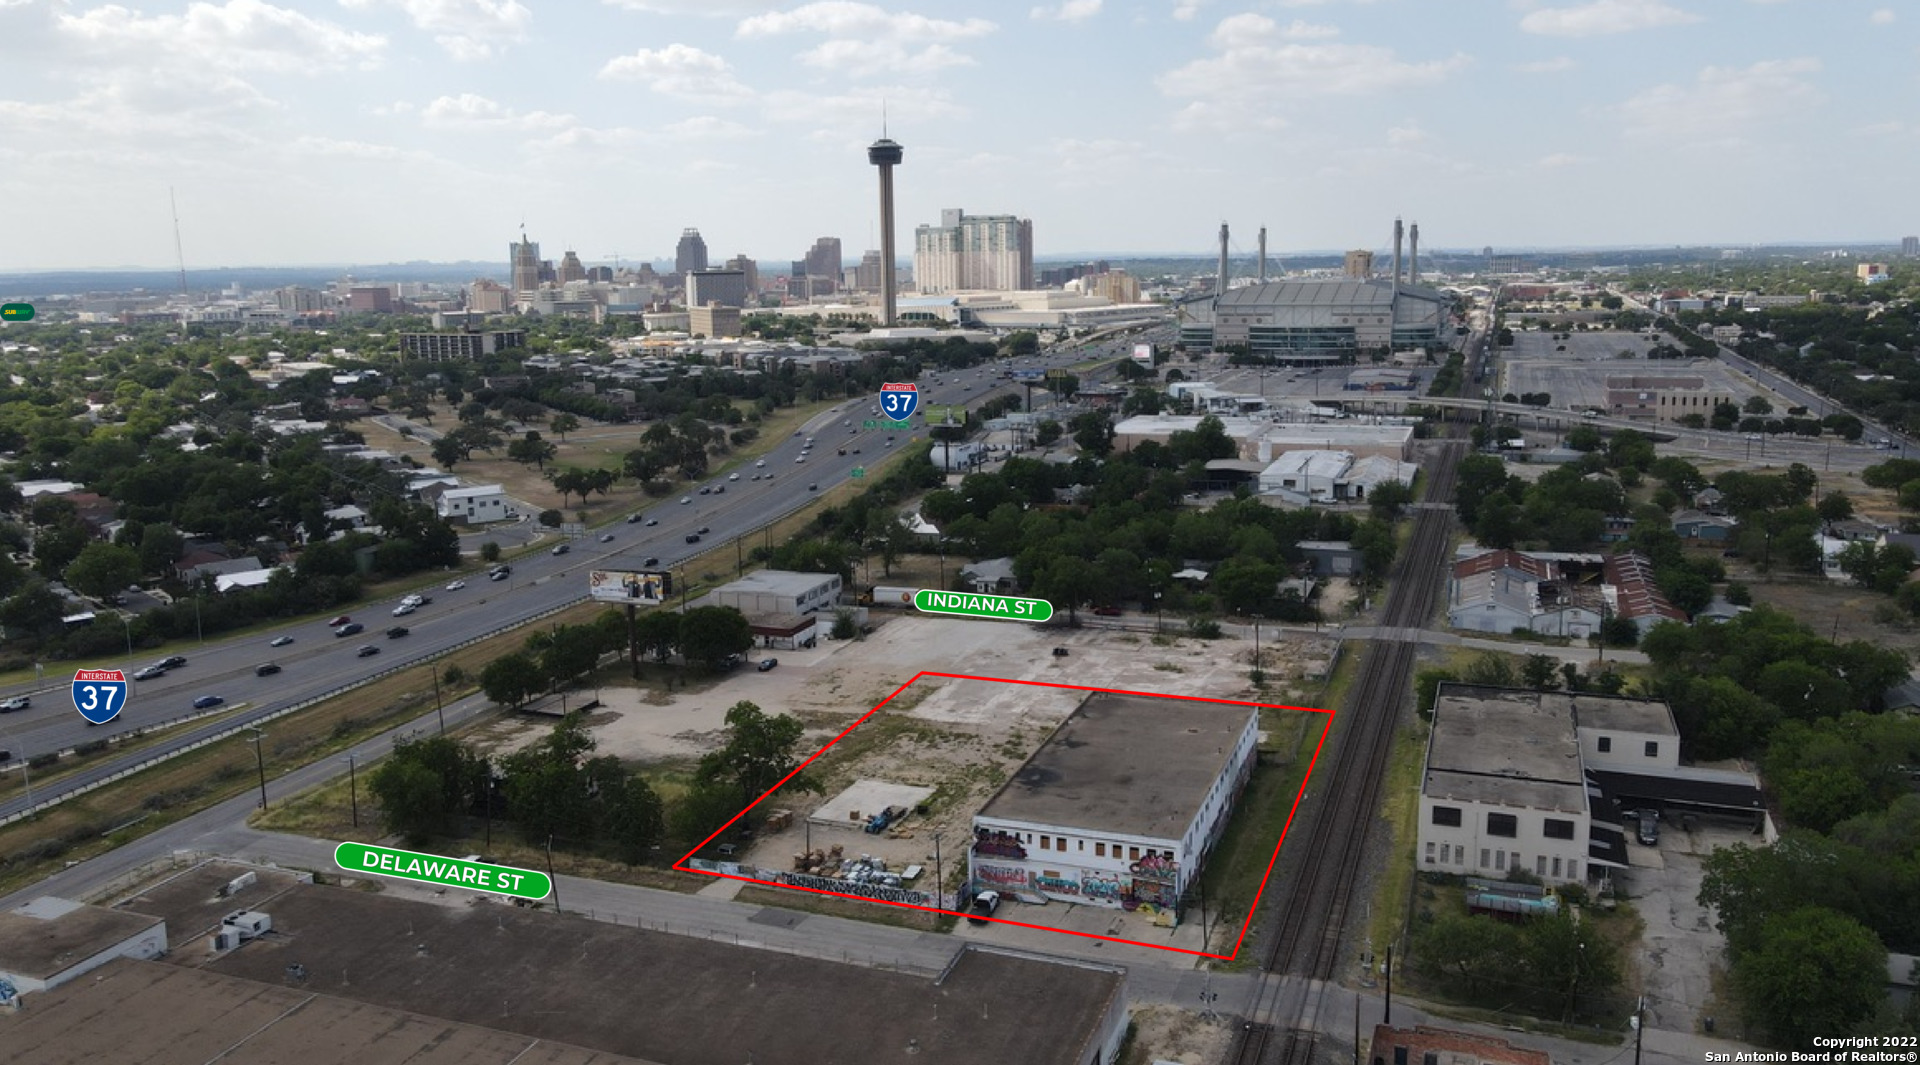 Unique opportunity to purchase or lease a 27,000 +/- SF Industrial/Commercial building lot in Downtown  San Antonio, TX. Unbelievable opportunity for any Industrial Warehouse, Flex Space or Retail This property sits on .94 +/- acres, is in shell condition, has 205 +/- linear feet of frontage and is zoned  IDZ-3. Adjacent to 2.9  acres additionally for sale.